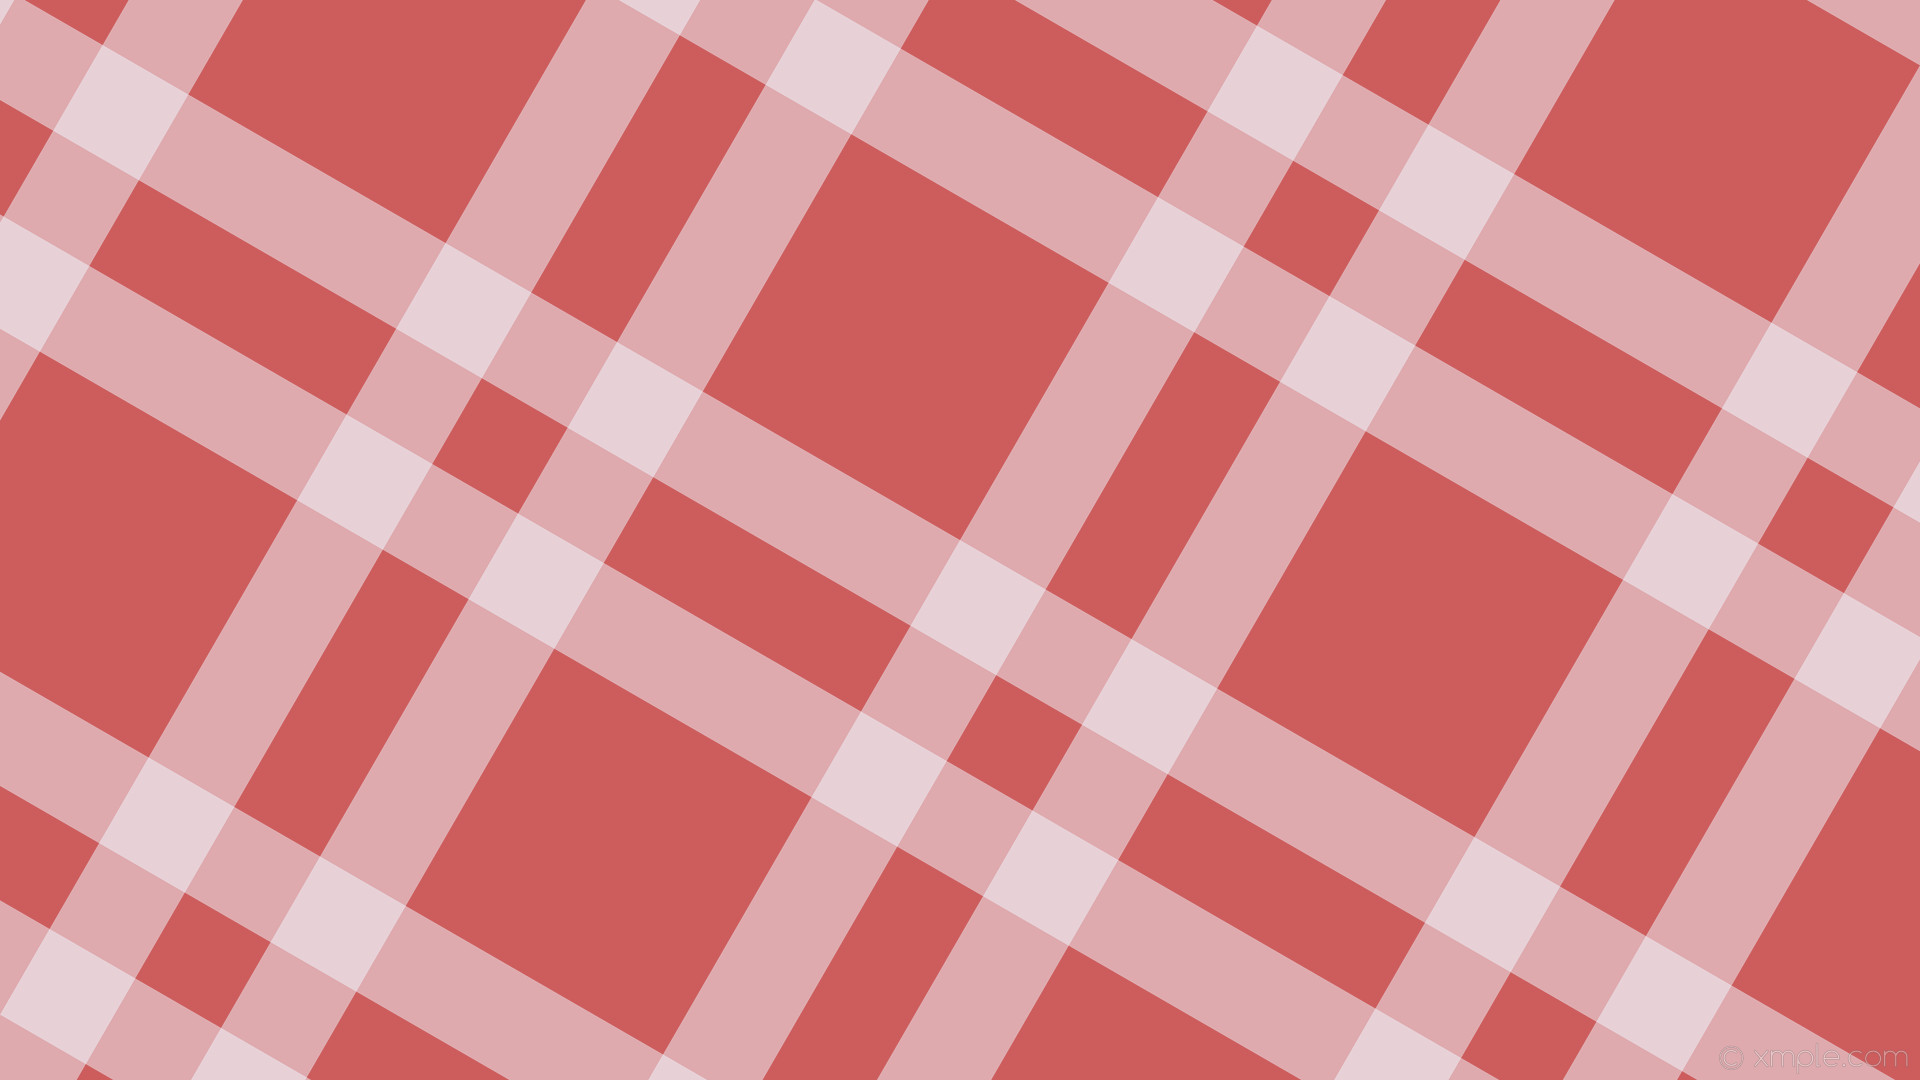 1920x1080 wallpaper gingham red white dual striped indian red alice blue #cd5c5c  #f0f8ff 330Â°